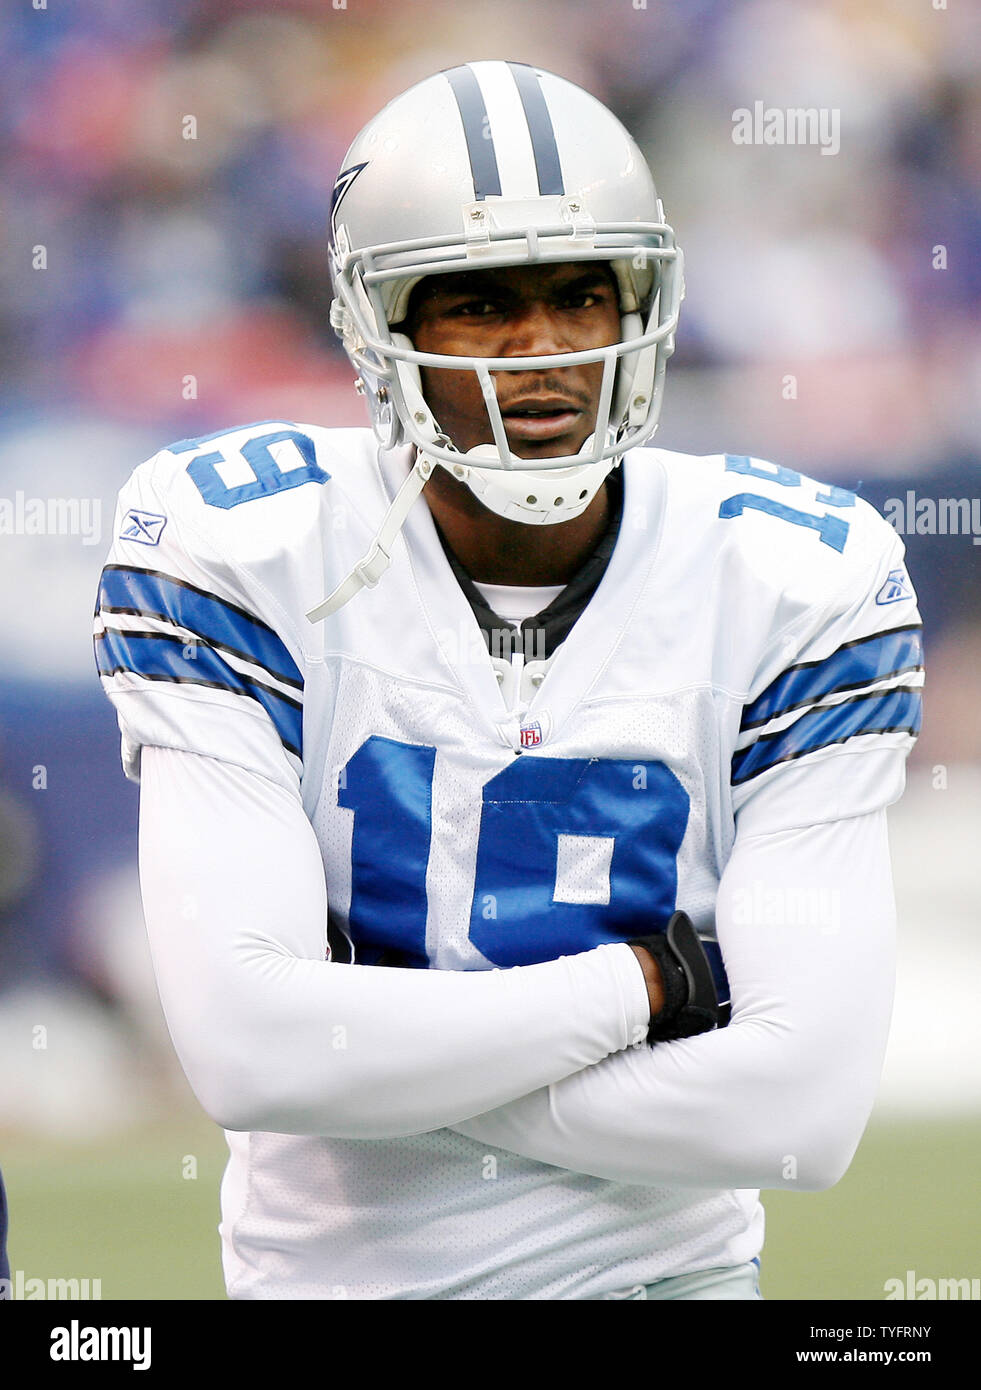 Dallas Cowboys wide receiver Keyshawn Johnson reacts on the sidelines in  week 13 at Giants Stadium in East Rutherford, New Jersey on December 4,  2005. The New York Giants defeated the Dallas